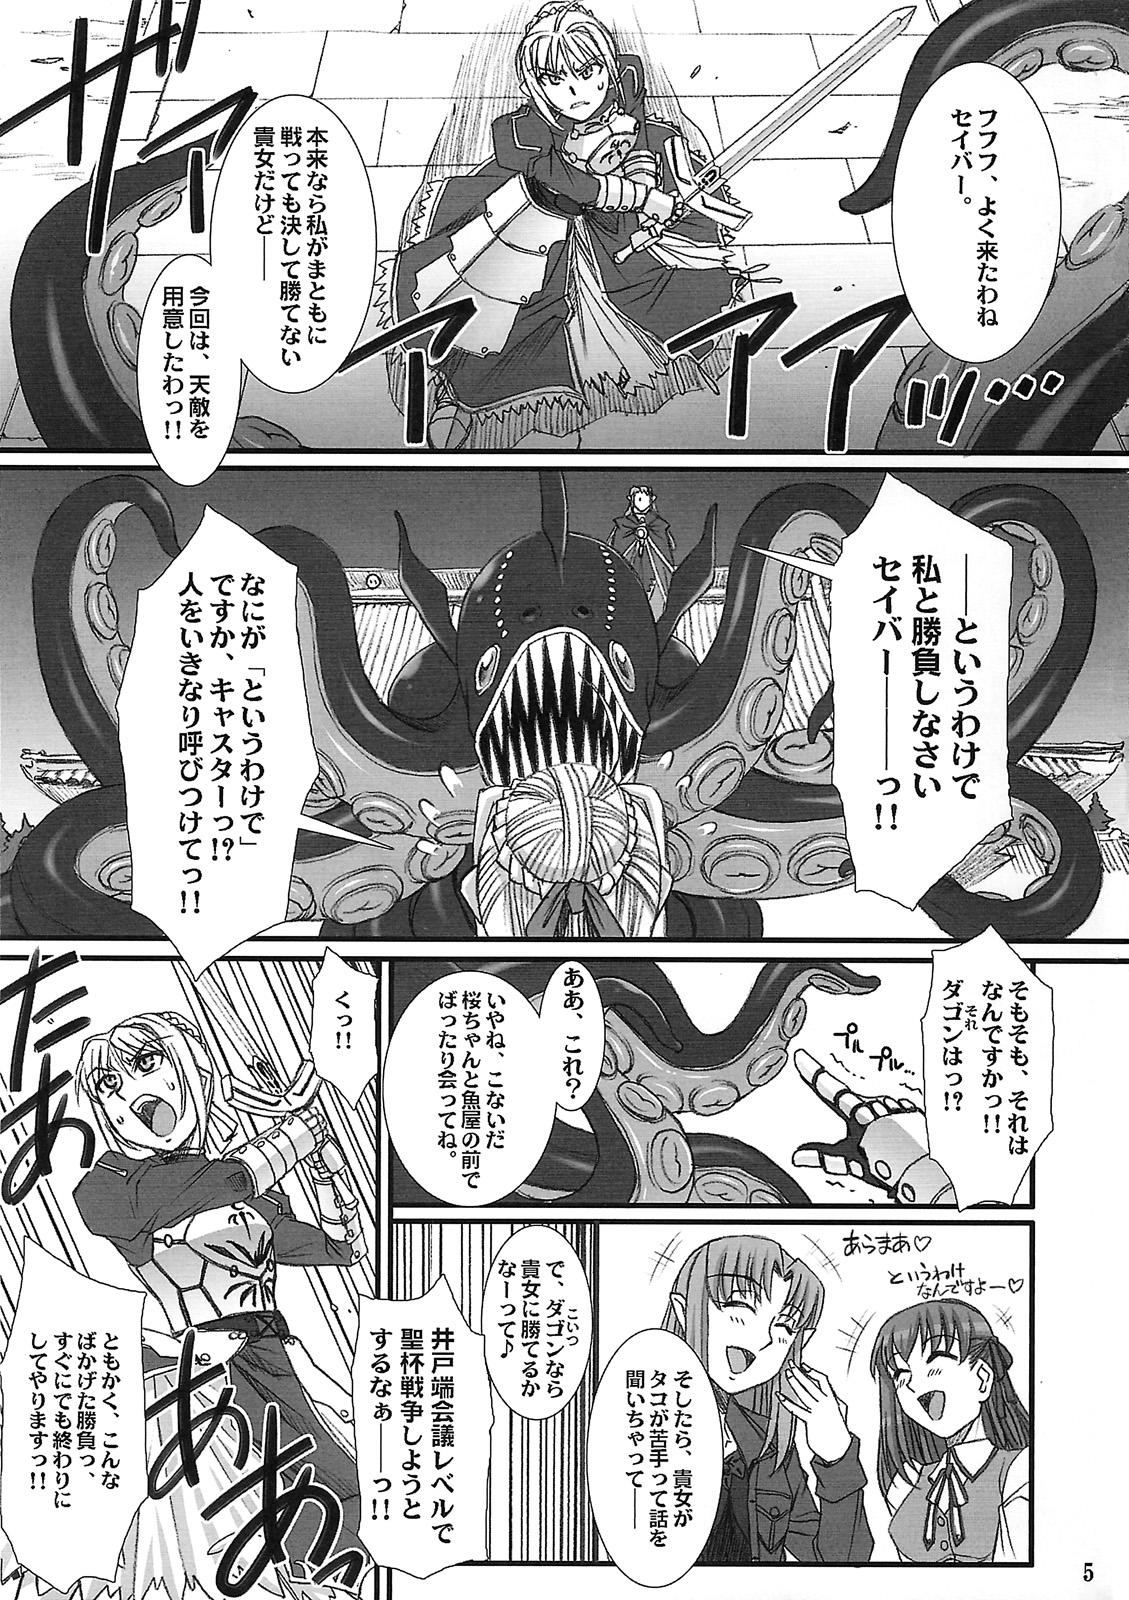 Transsexual Kishiou no Junan? - Fate stay night Soloboy - Page 4